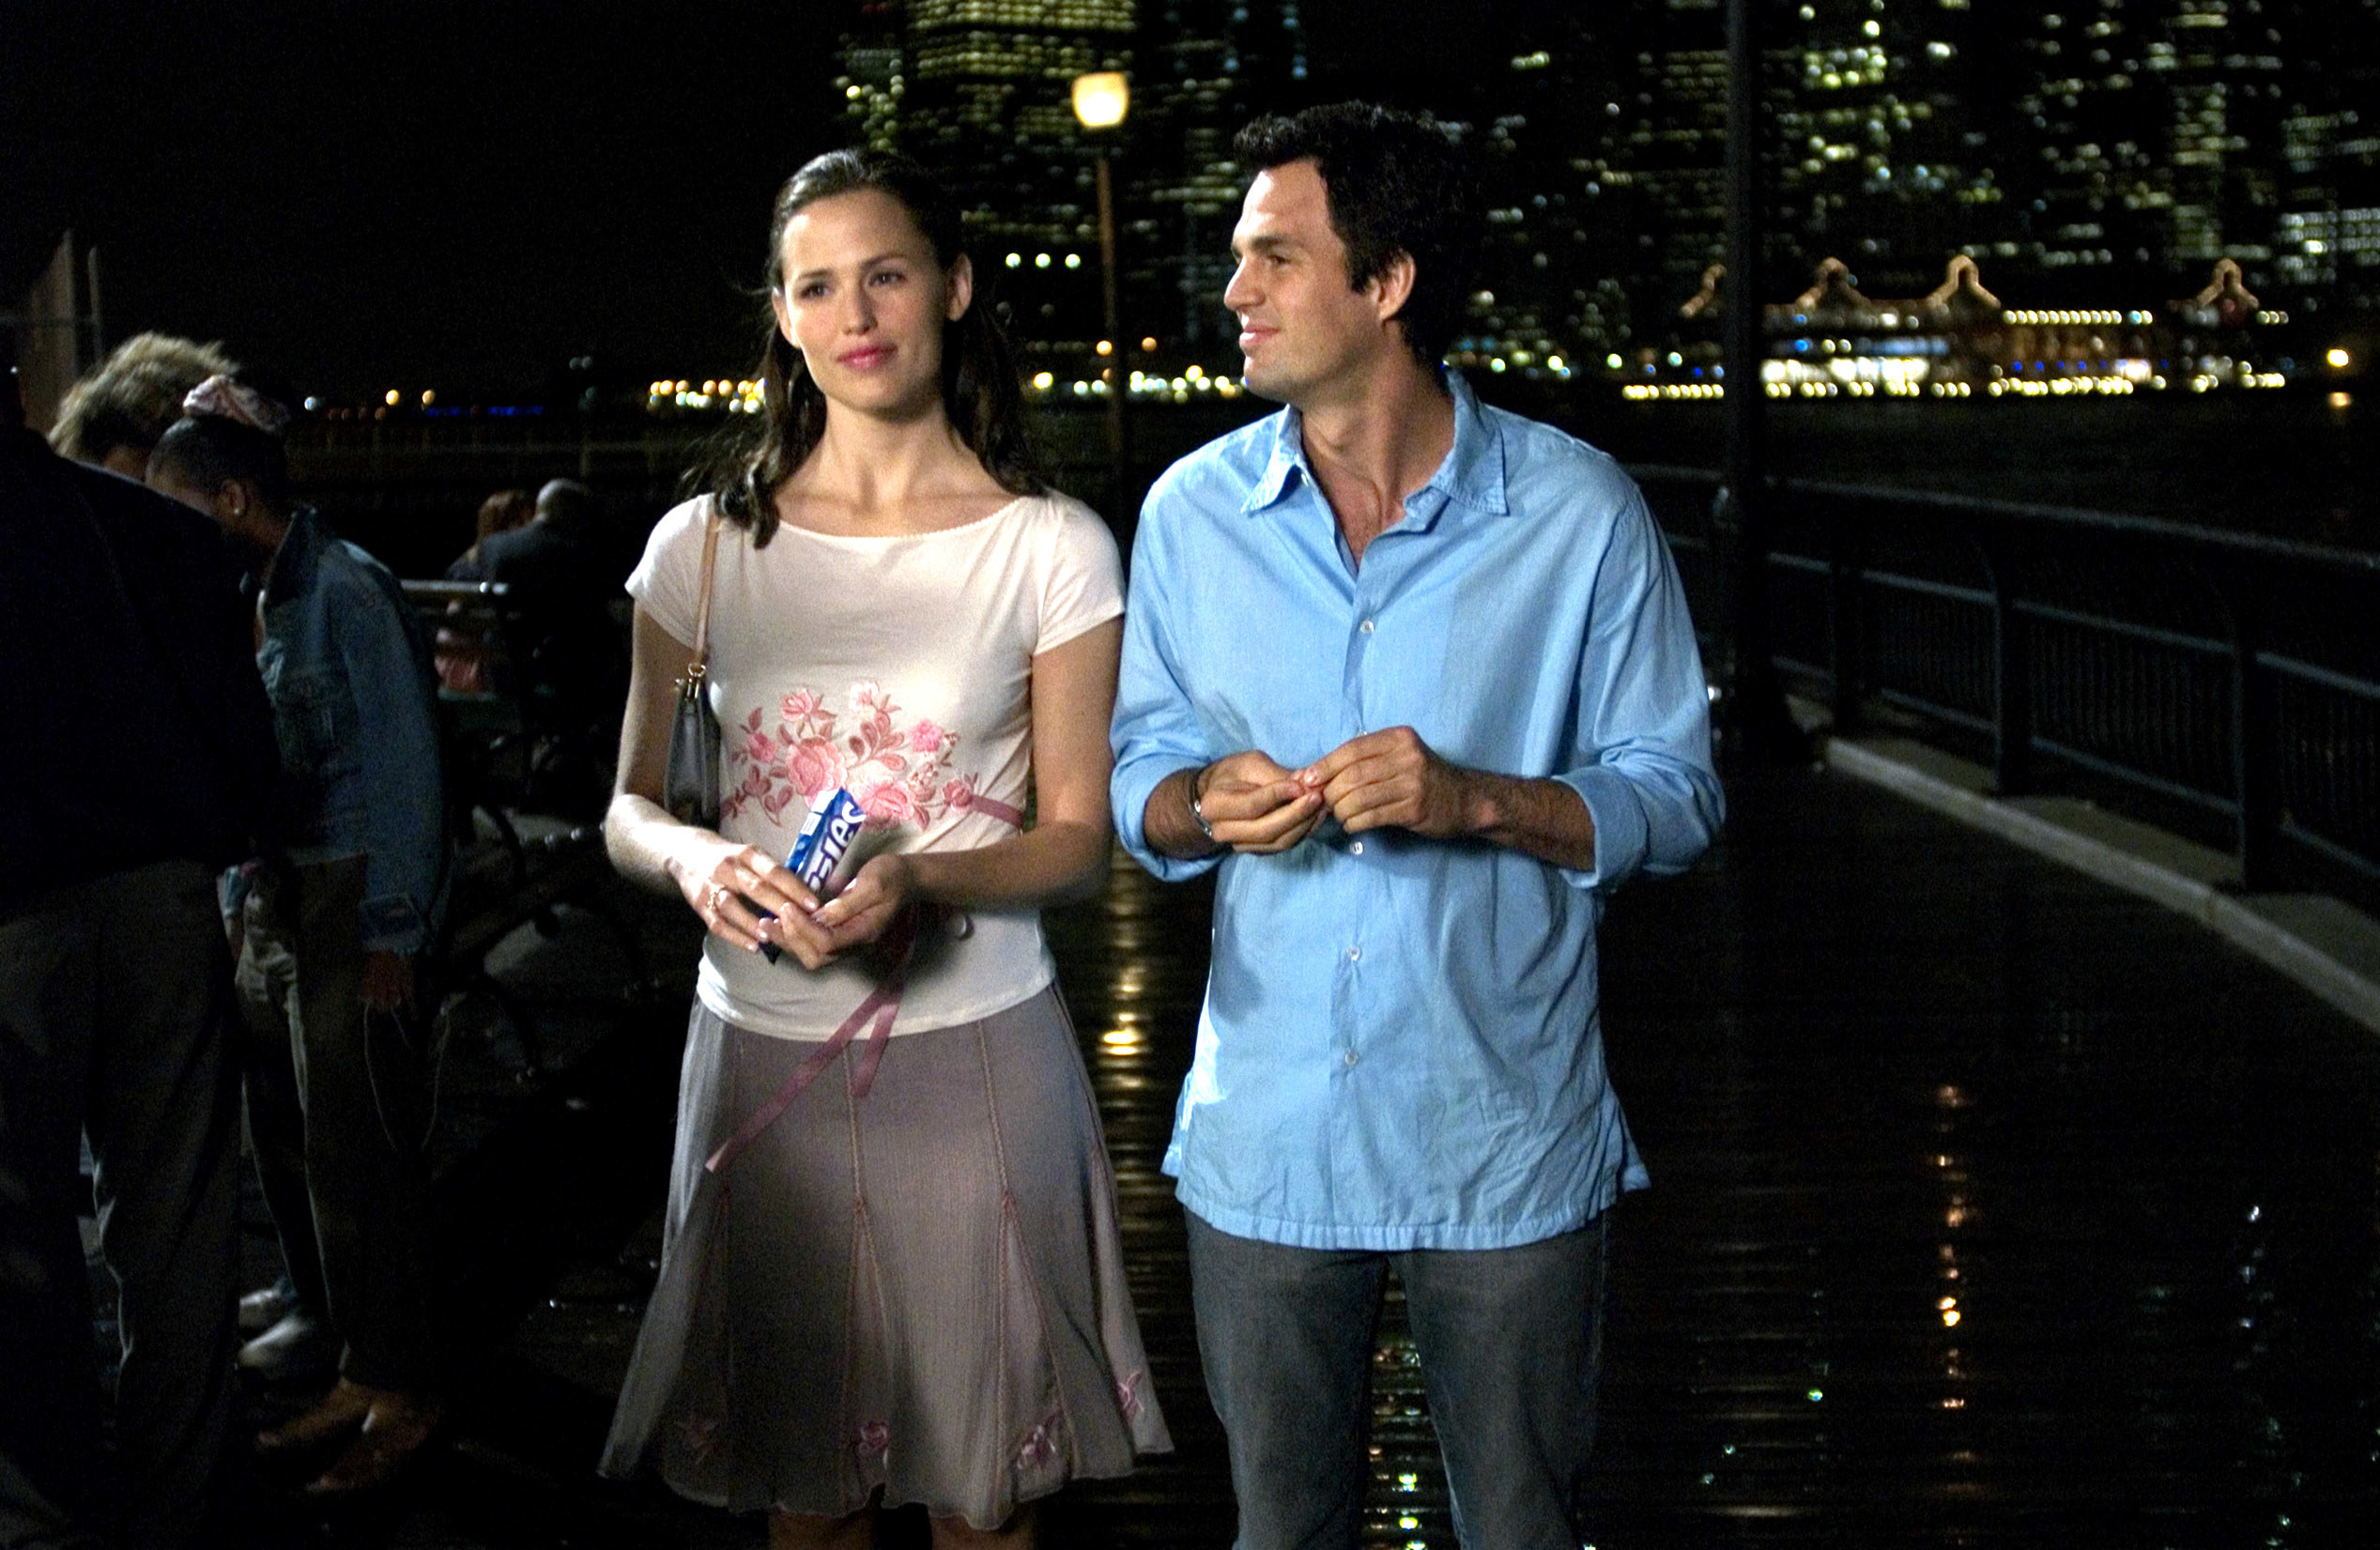 Jennifer and Mark walking outside at night in a scene from 13 Going on 30